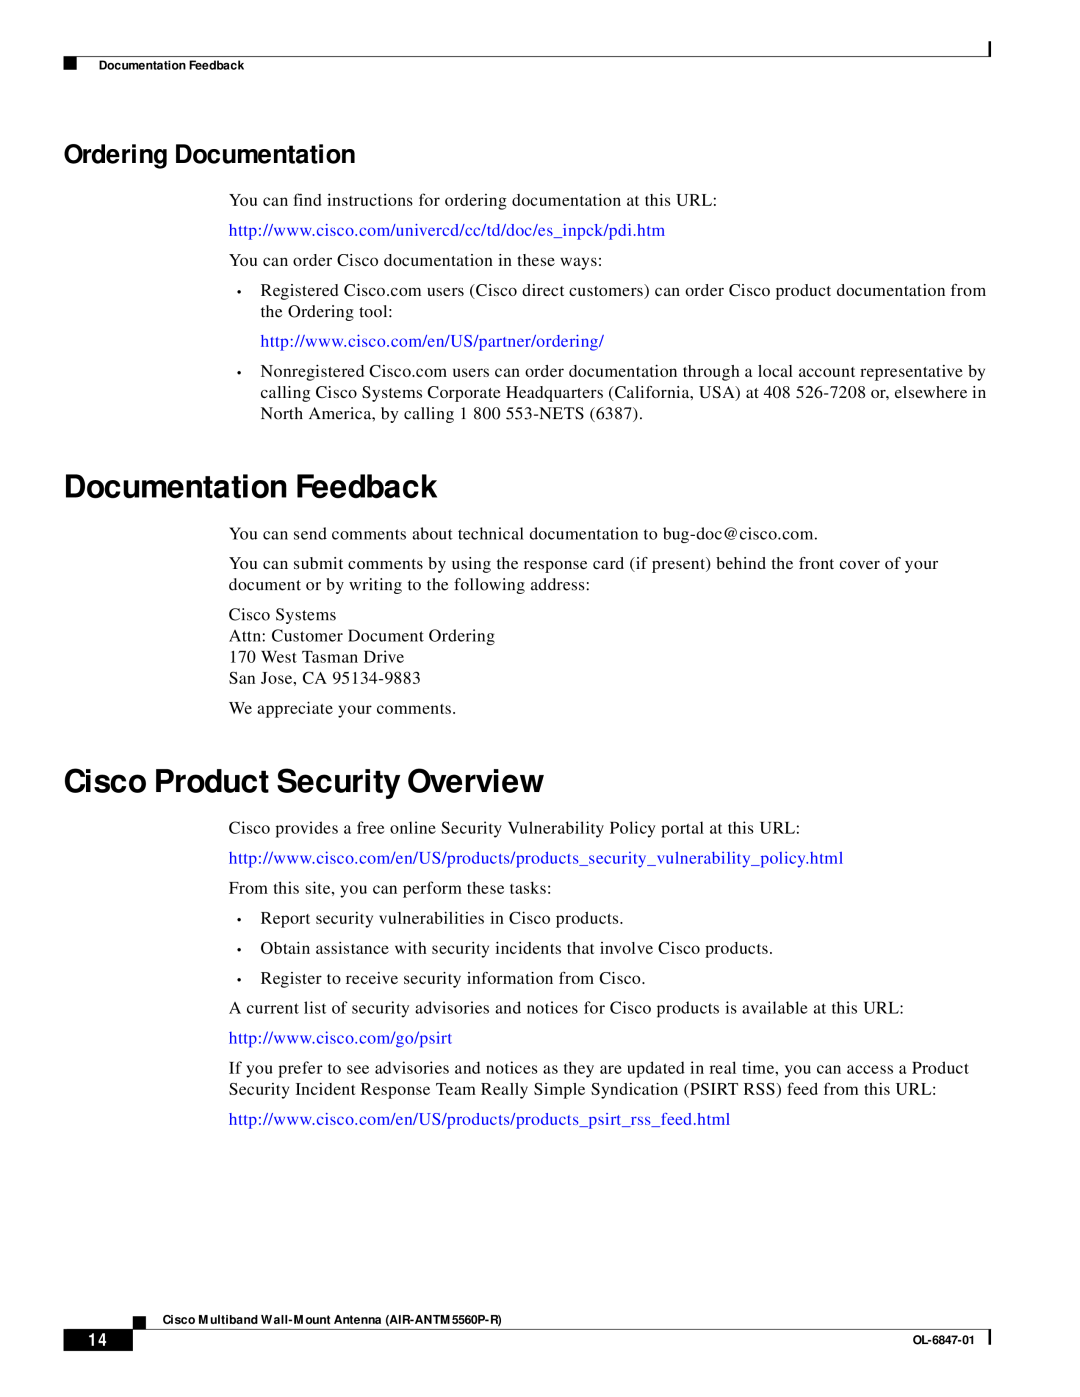 Cisco Systems AIR-ANTM5560P-R warranty Documentation Feedback, Cisco Product Security Overview, Ordering Documentation 